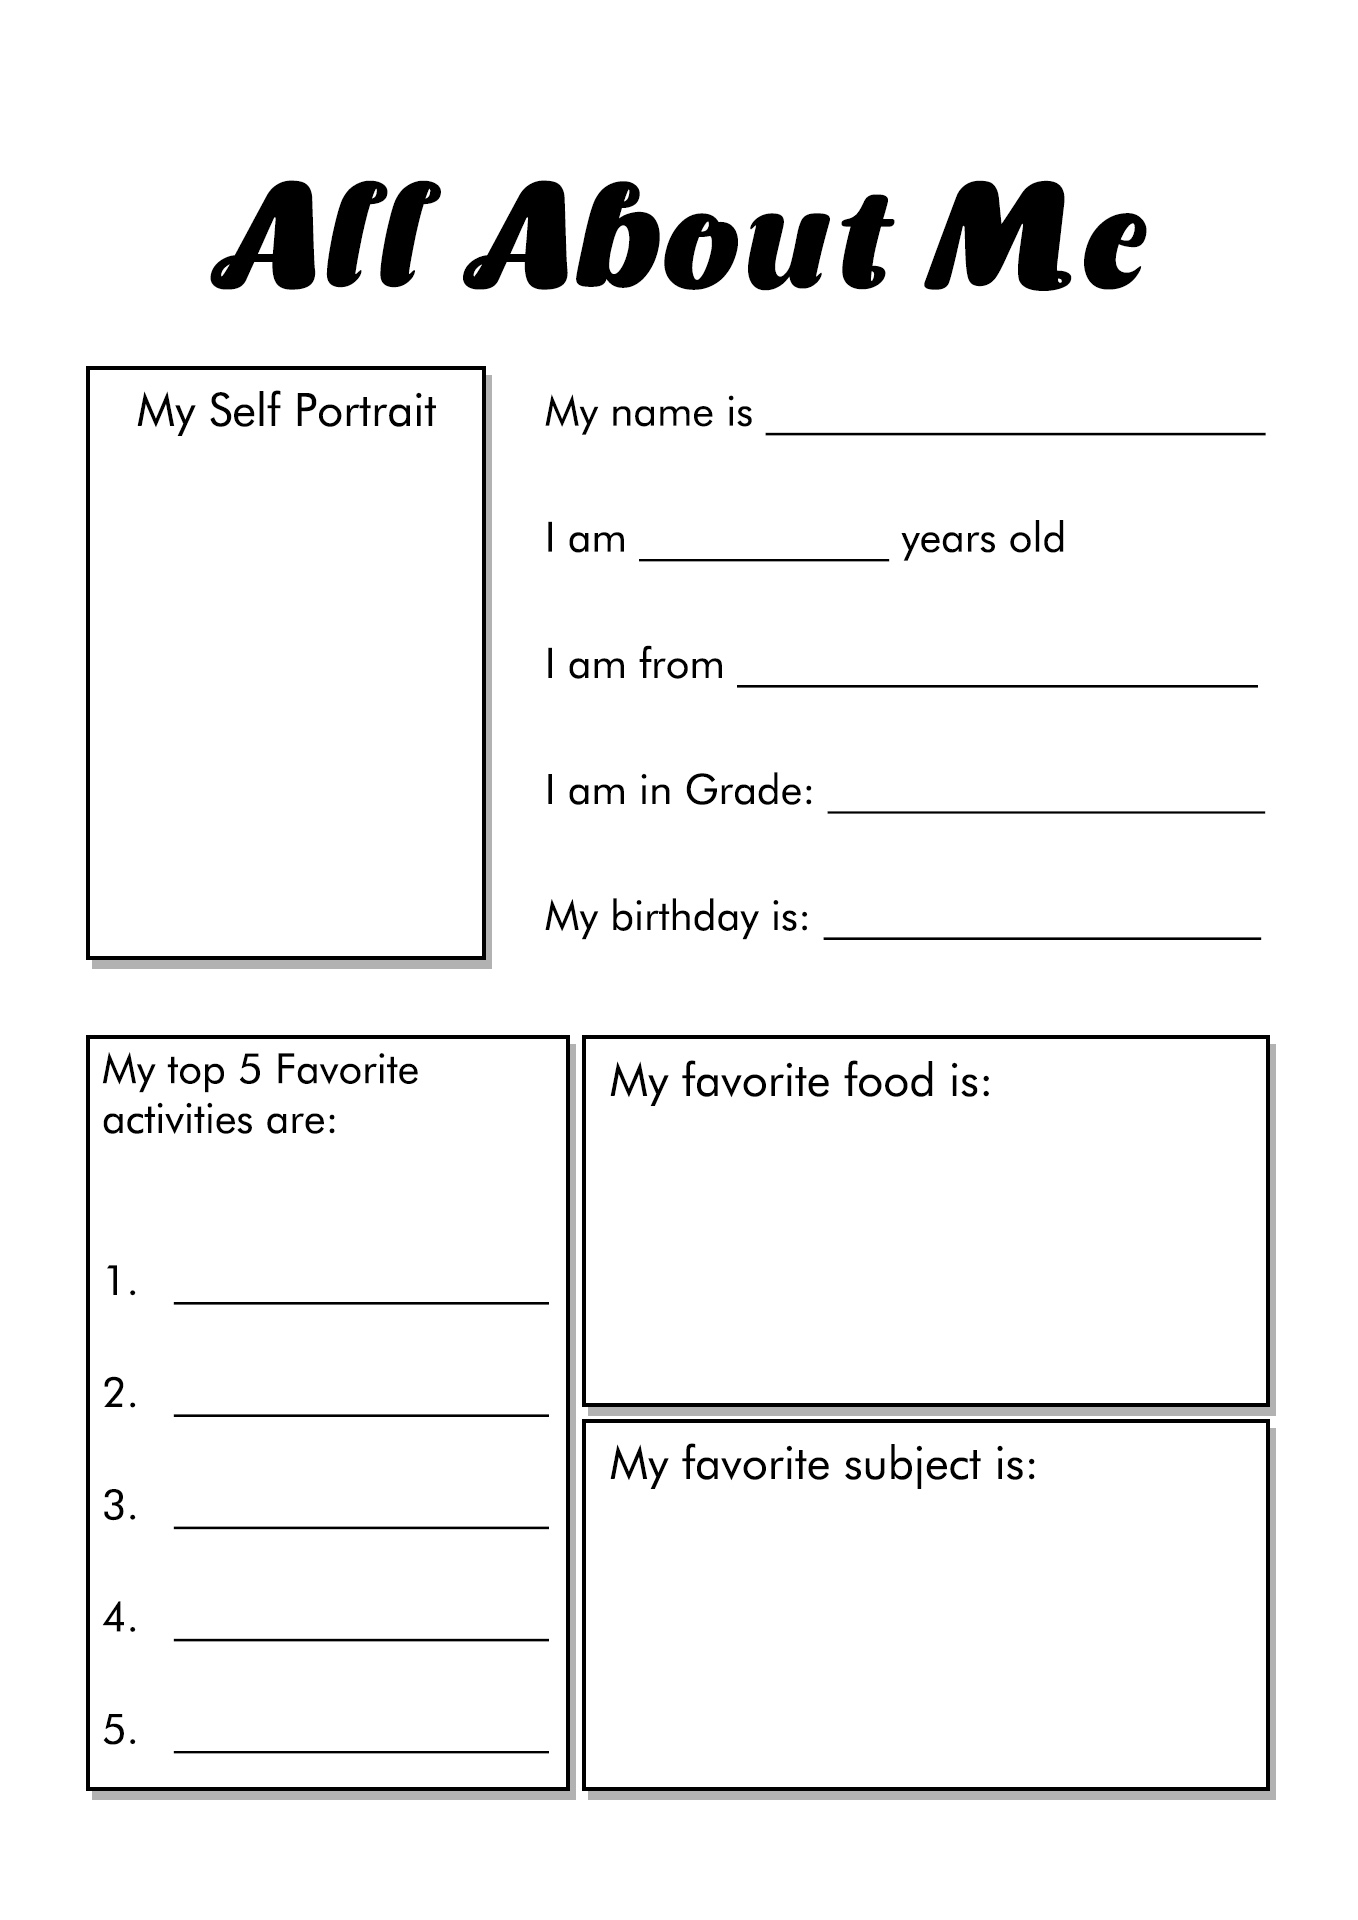 16-best-images-of-all-about-me-worksheet-teenagers-all-about-me